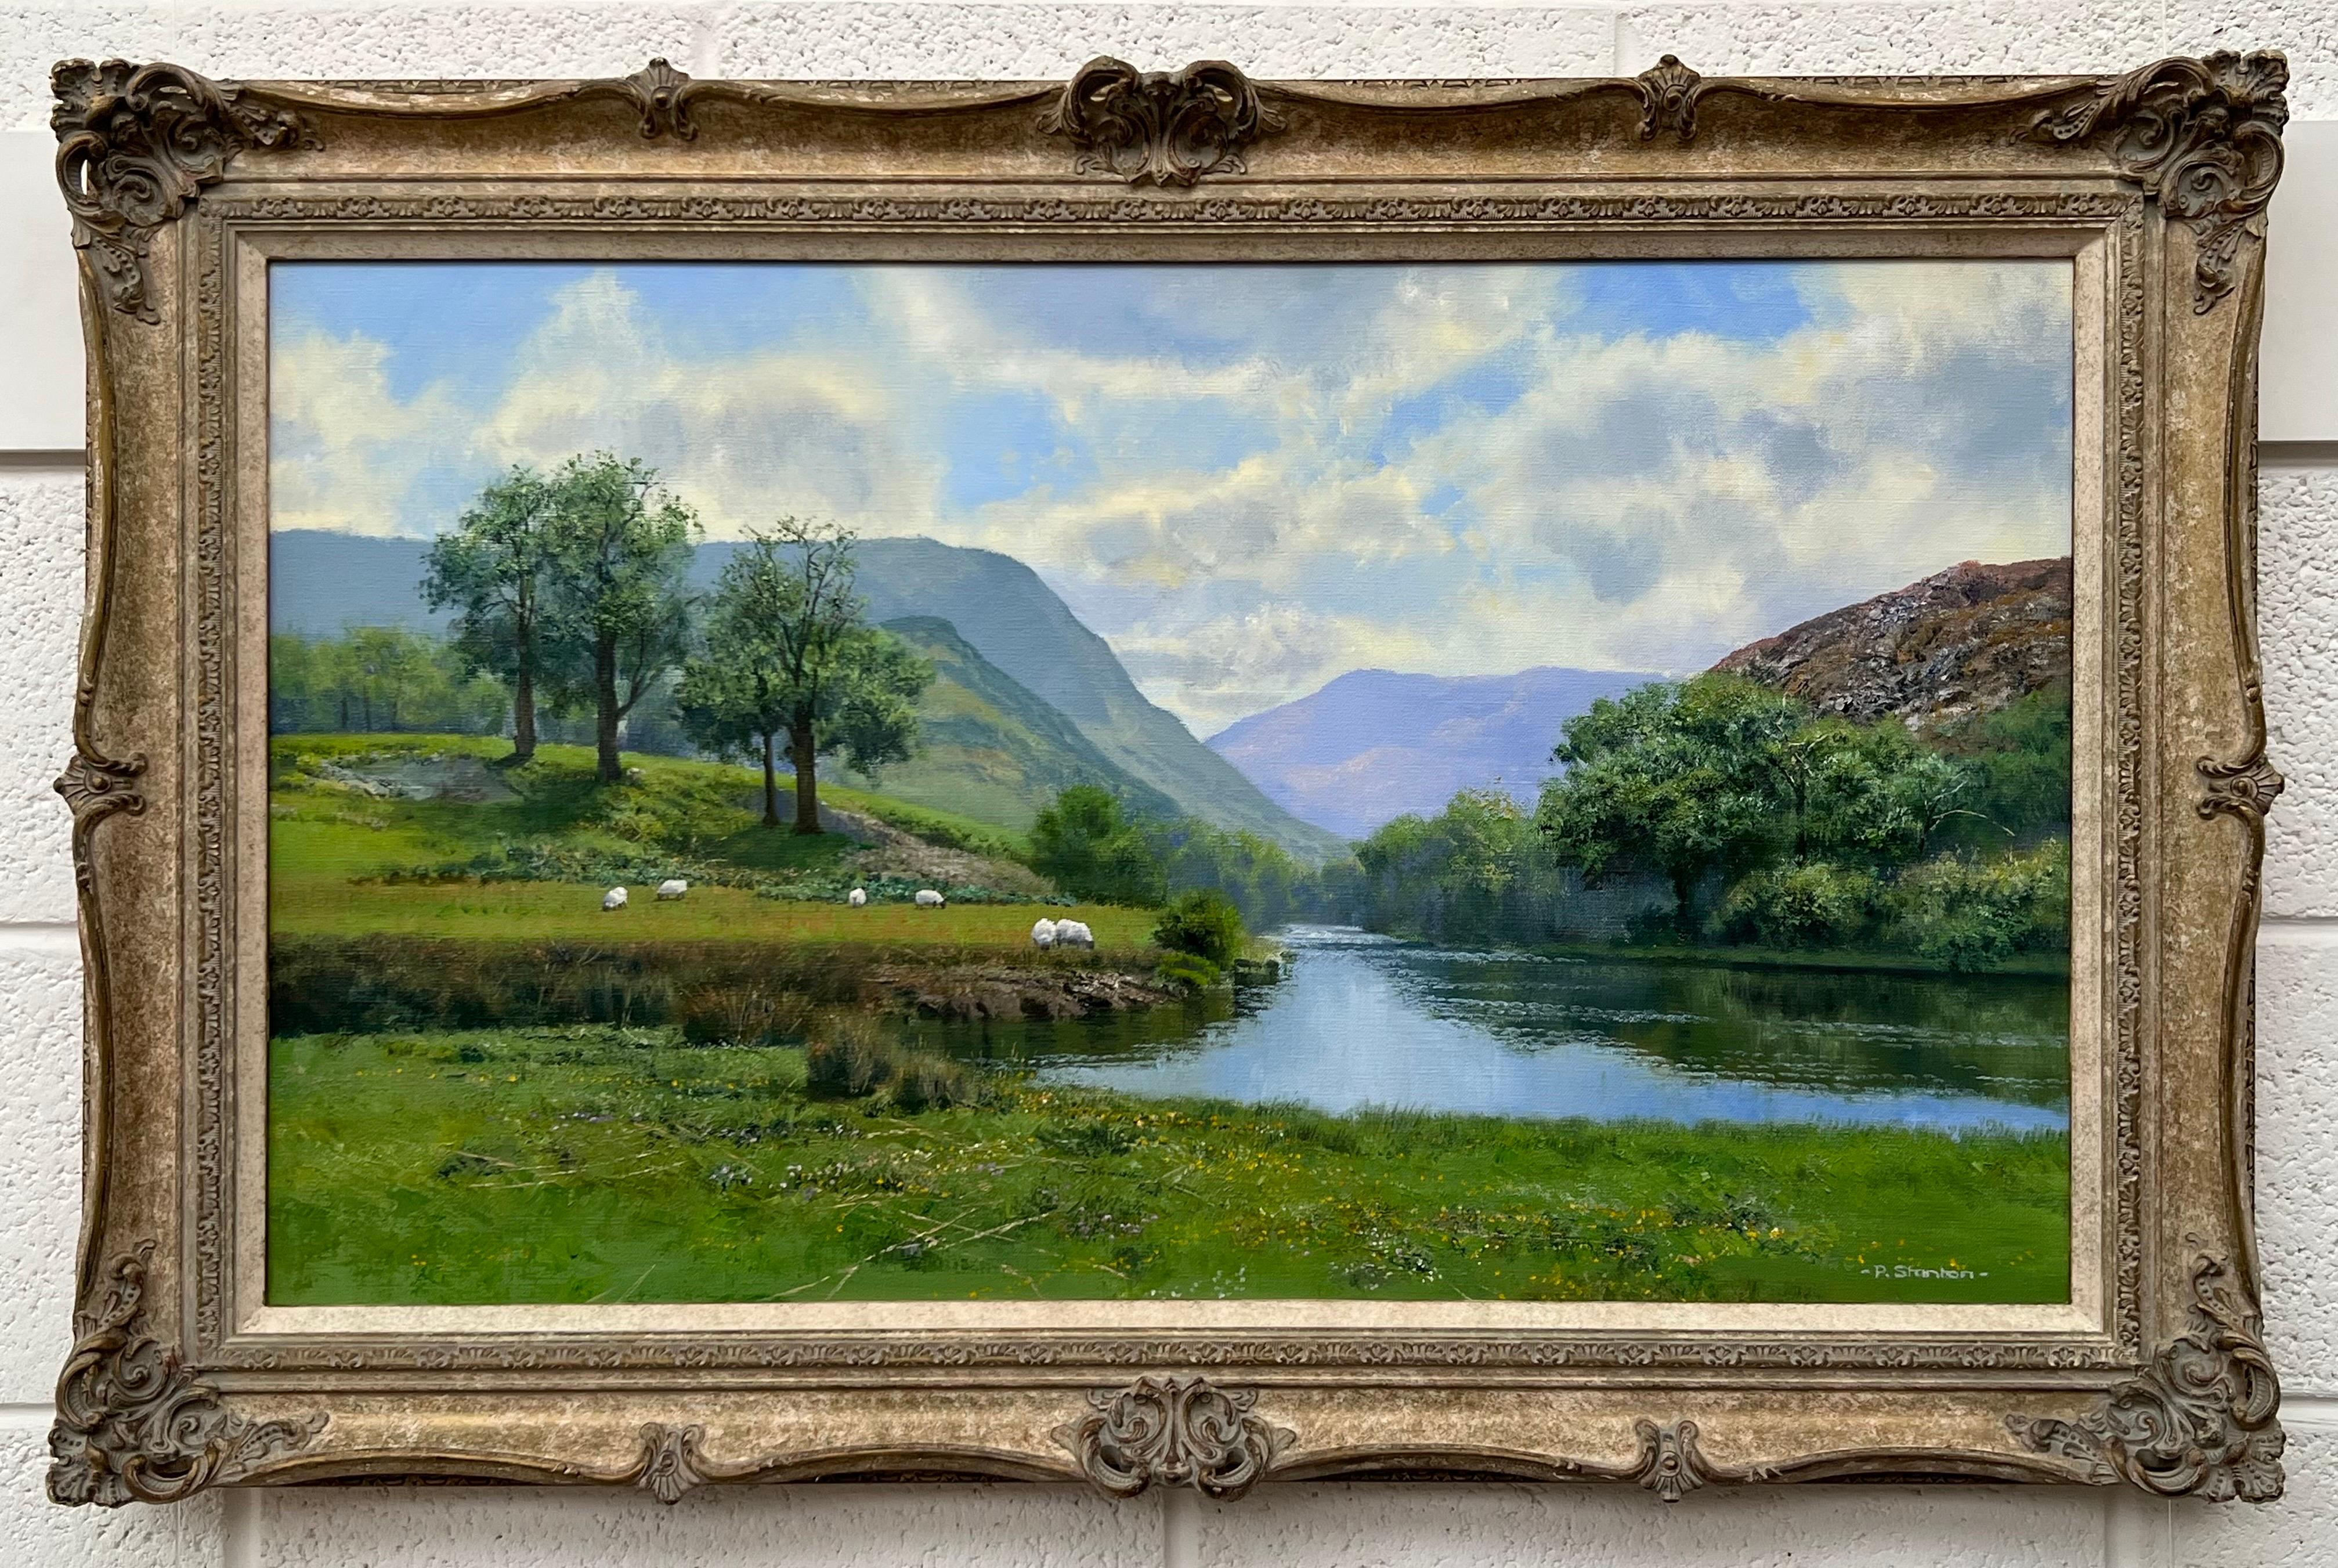 Lush Green River Landscape Painting of the English Countryside with Sheep in the Fields and Mountains in the Background, by British Artist, Philip Stanton. This is a high quality original, oil on canvas, in great condition and ready to hang!

Art